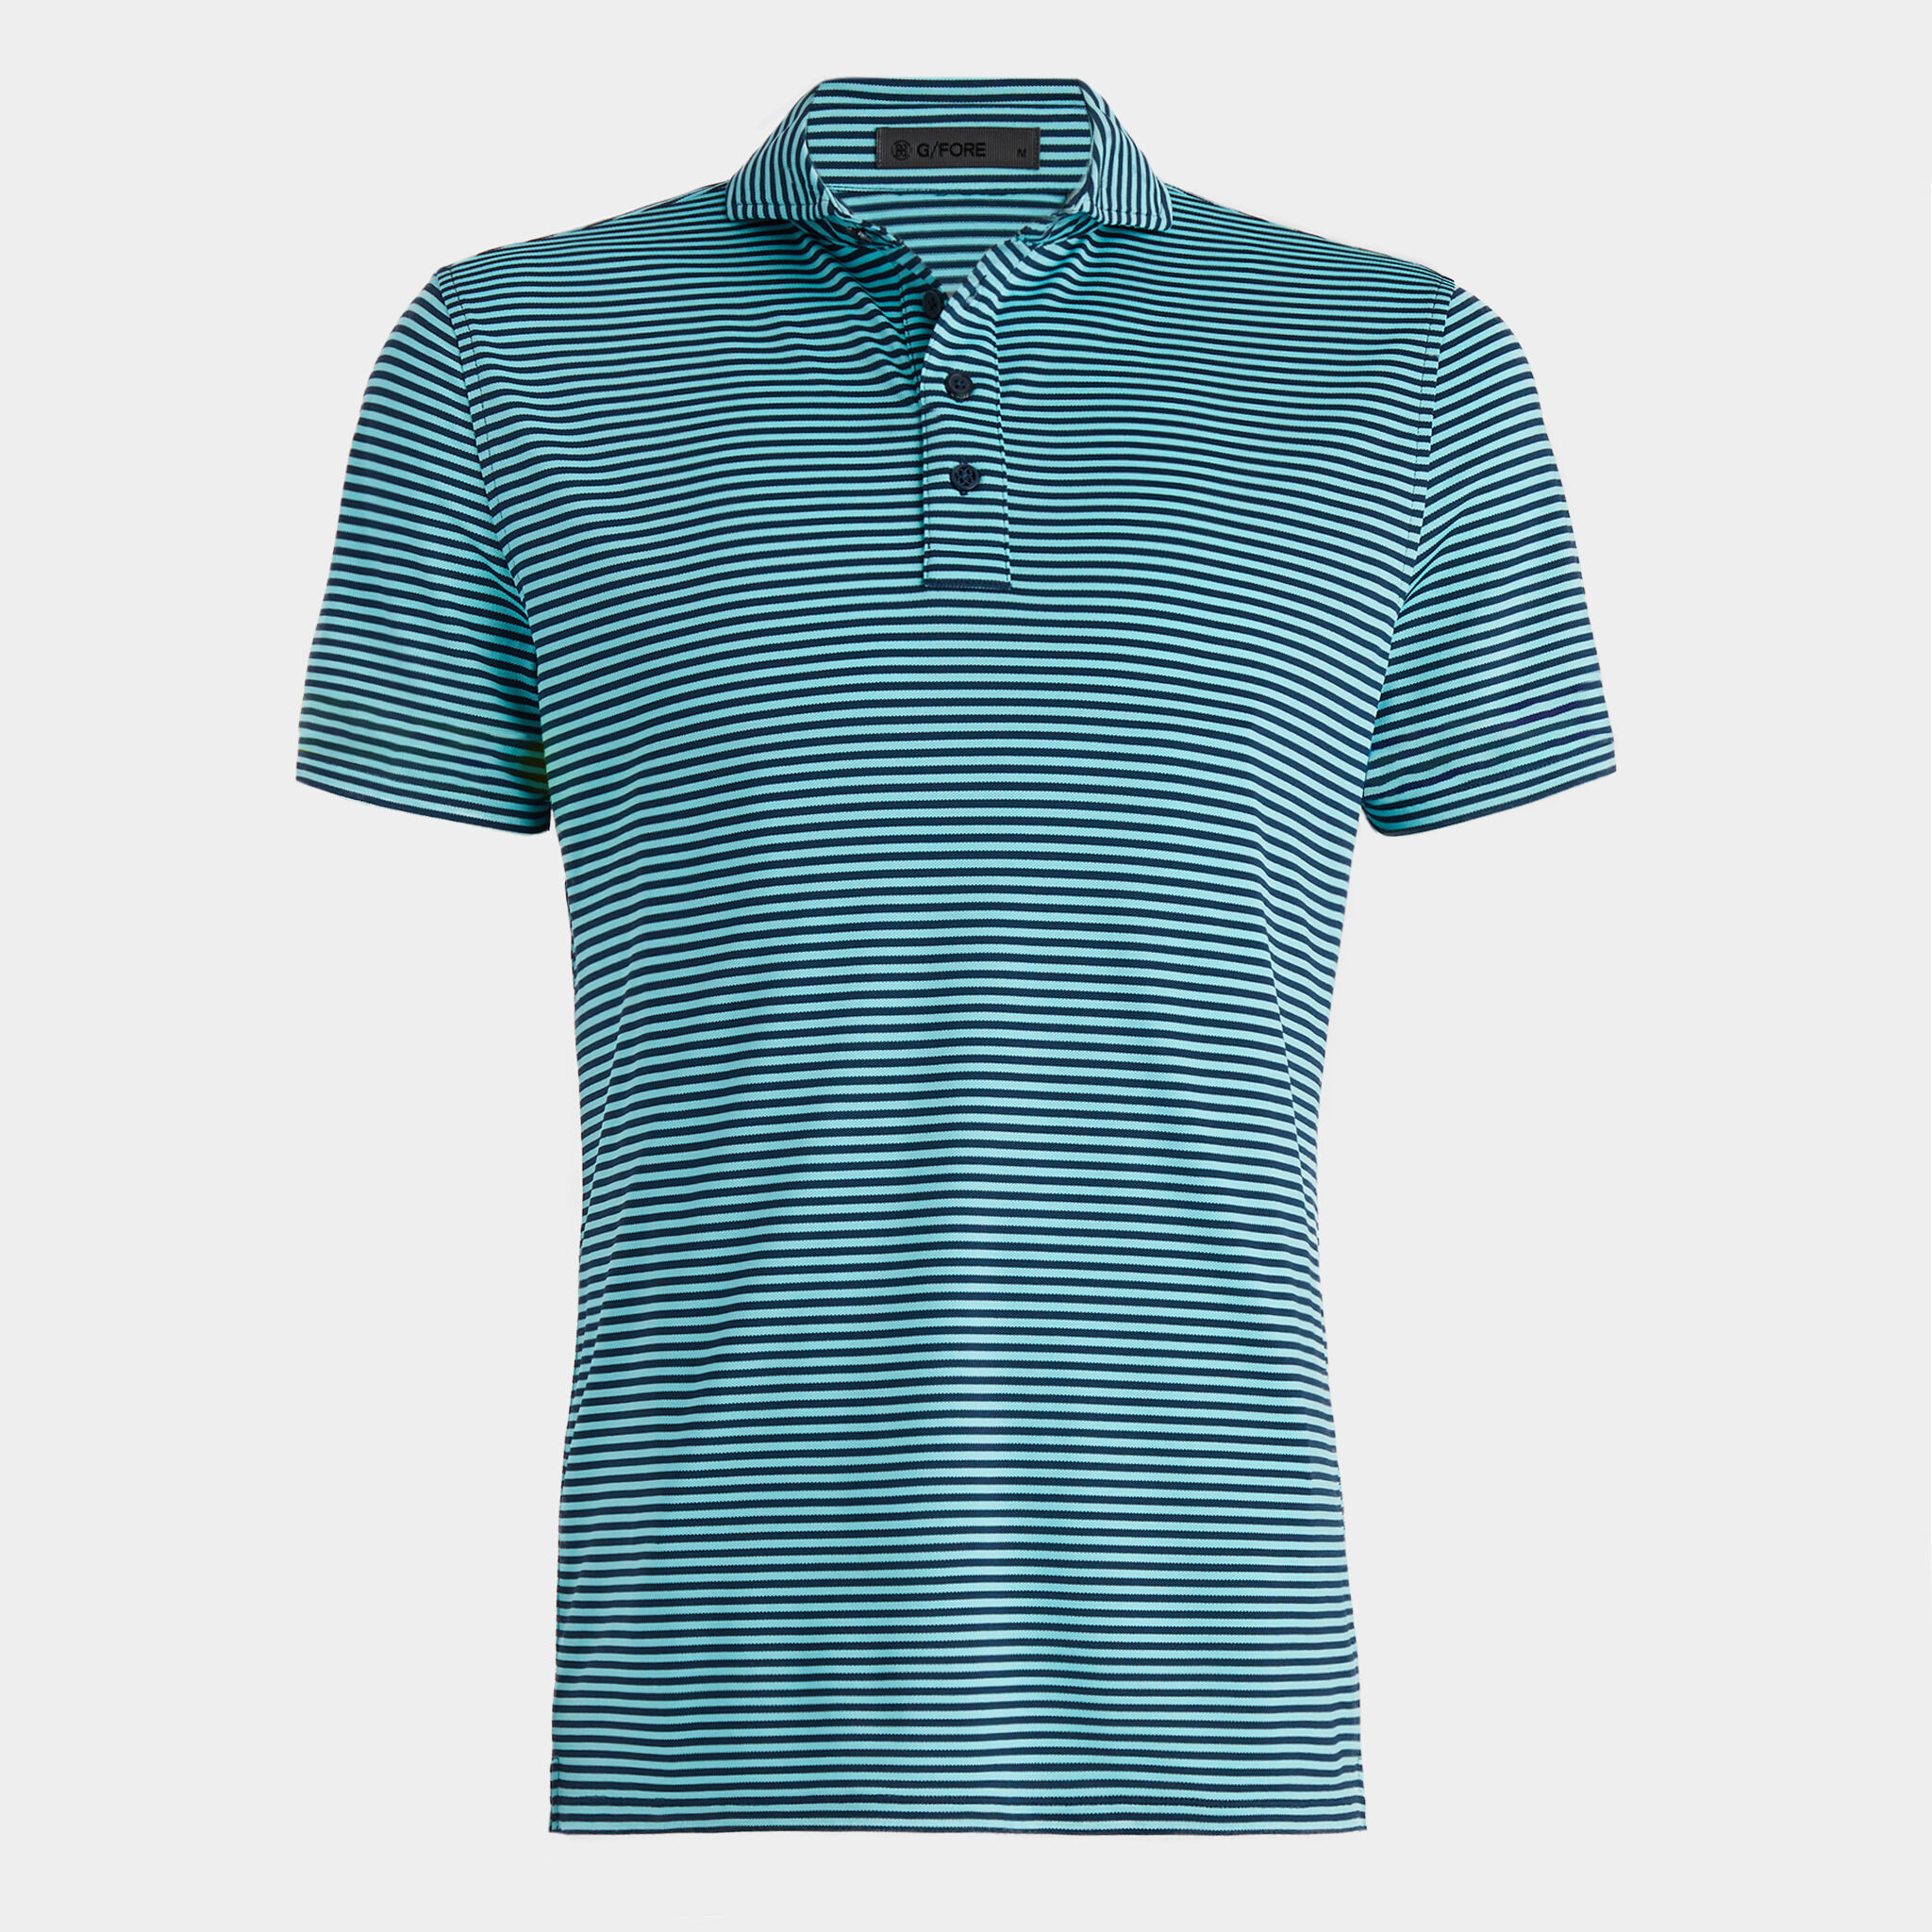 Men's Golf Polos – G/FORE